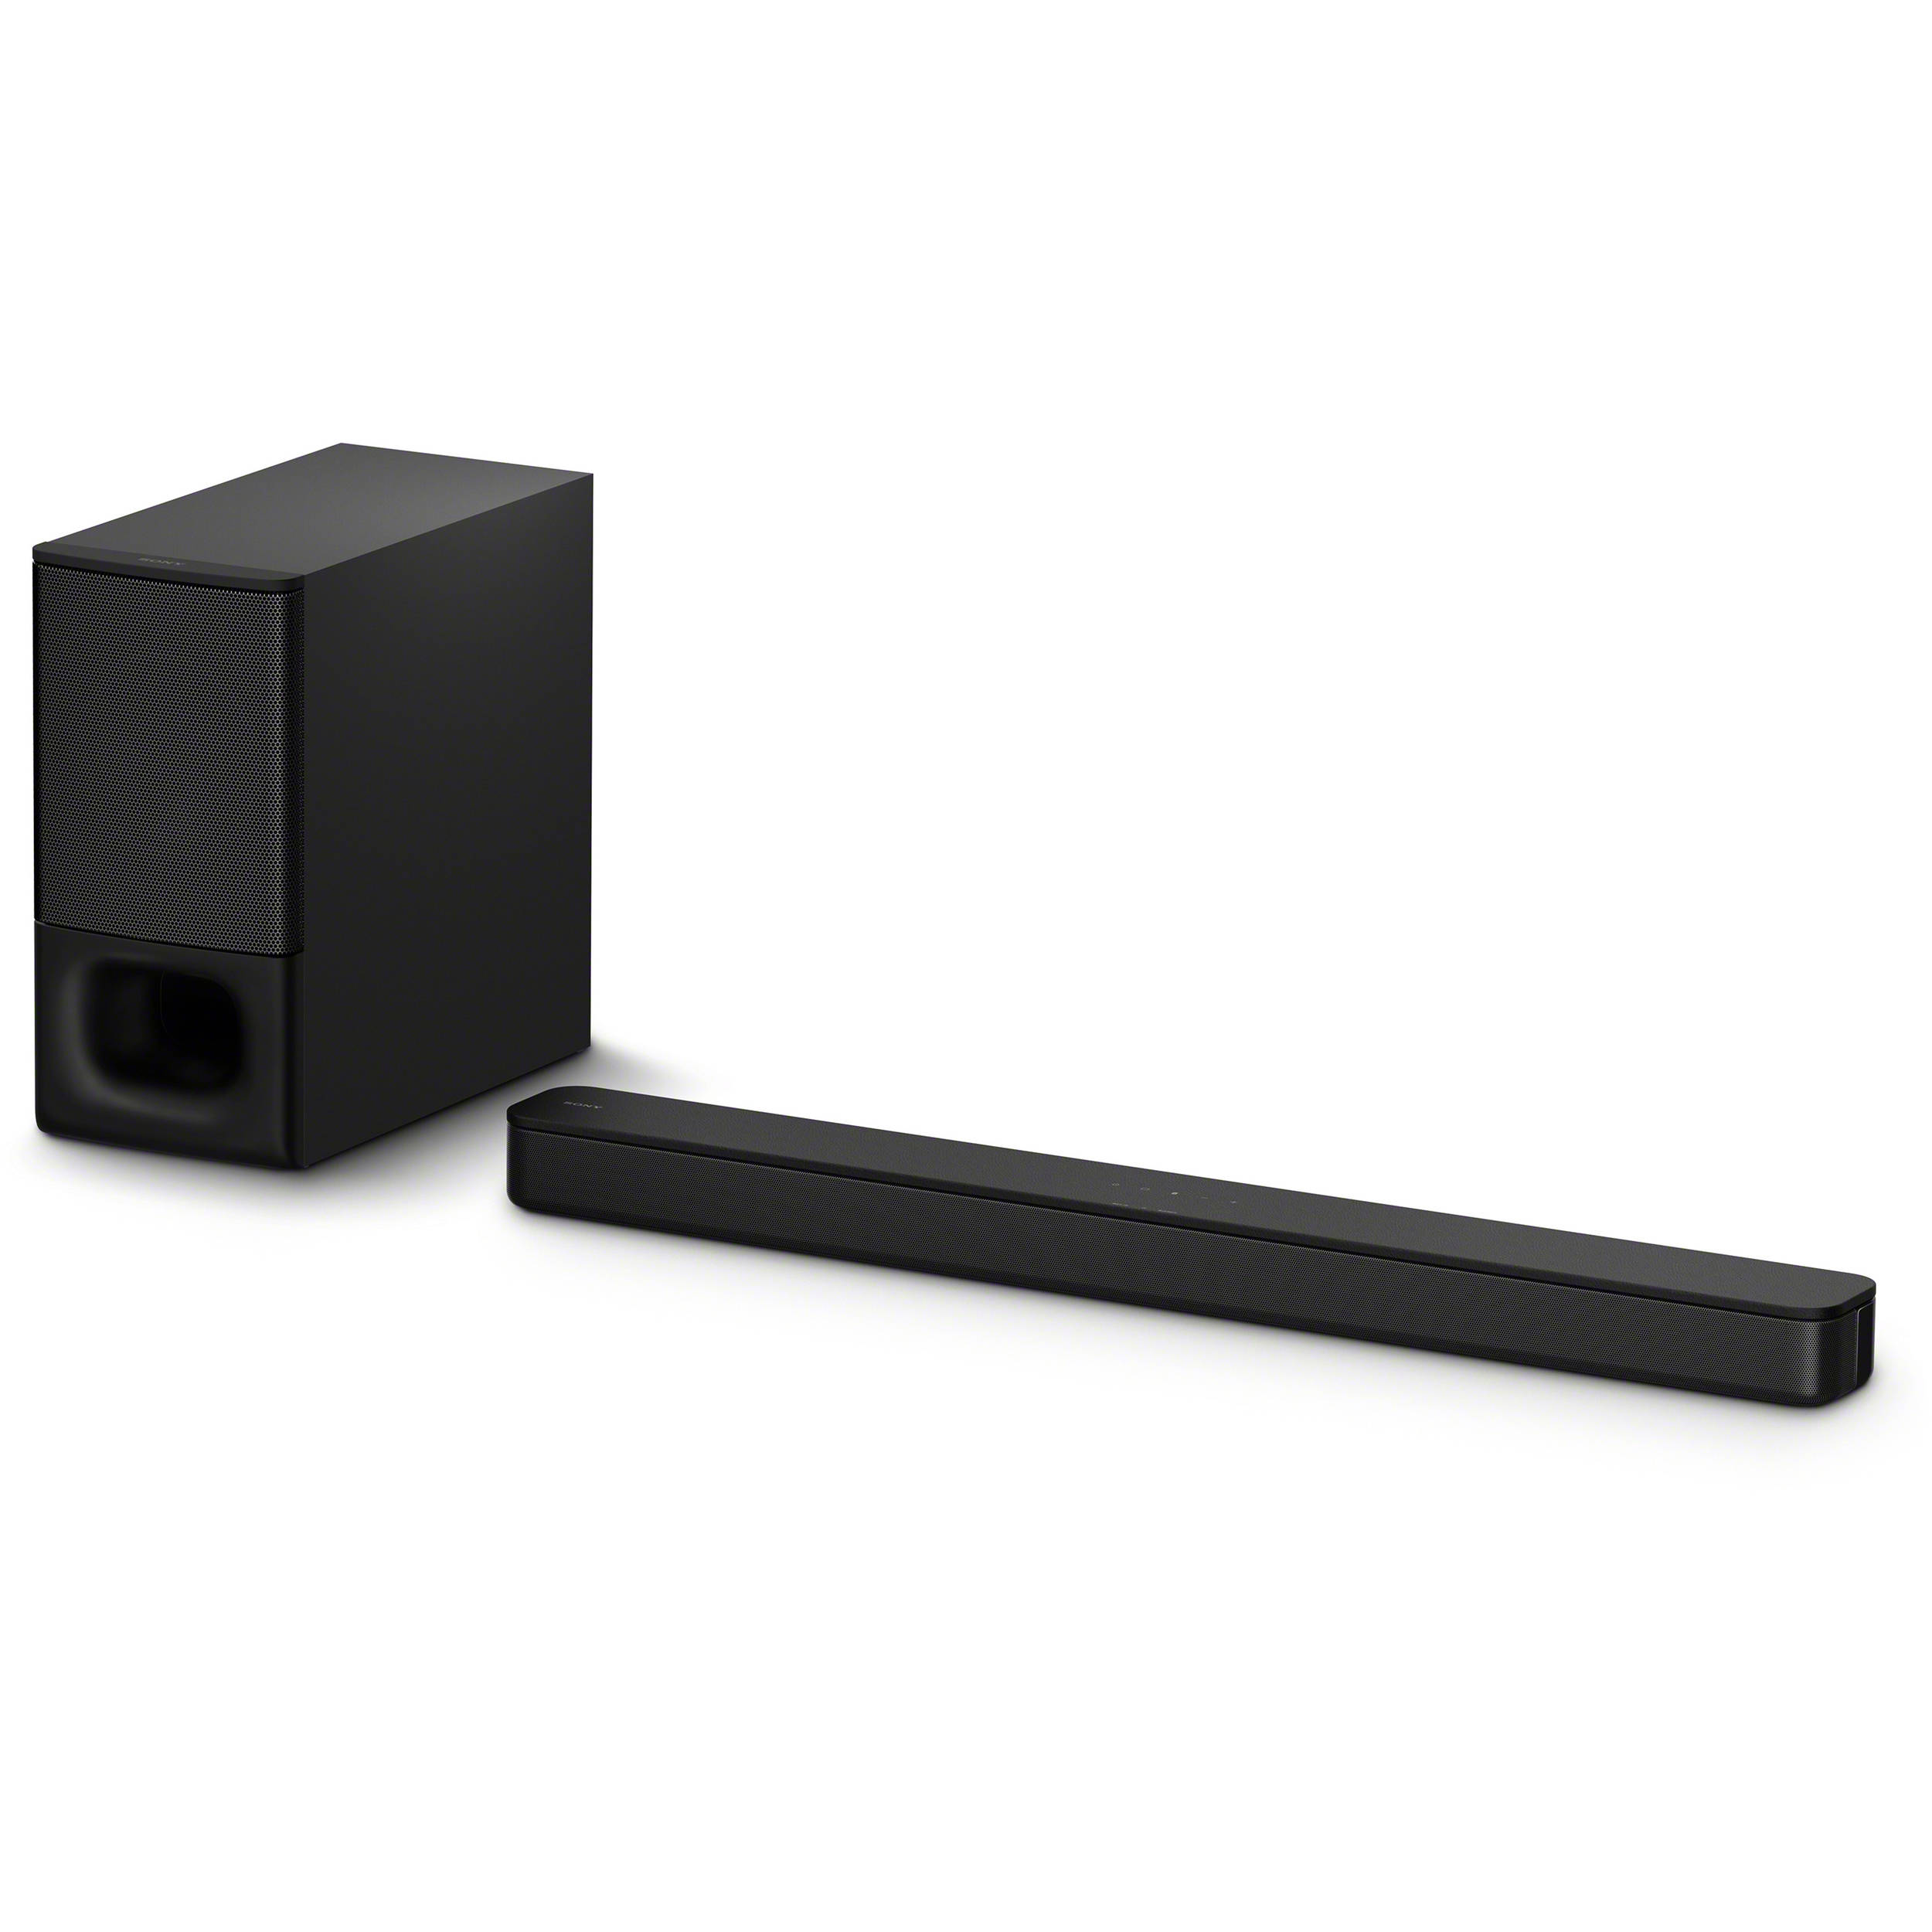 Sony 2.1CH Soundbar with Wireless Subwoofer - Bluetooth and HDMI Arc Compatible, HT-S350